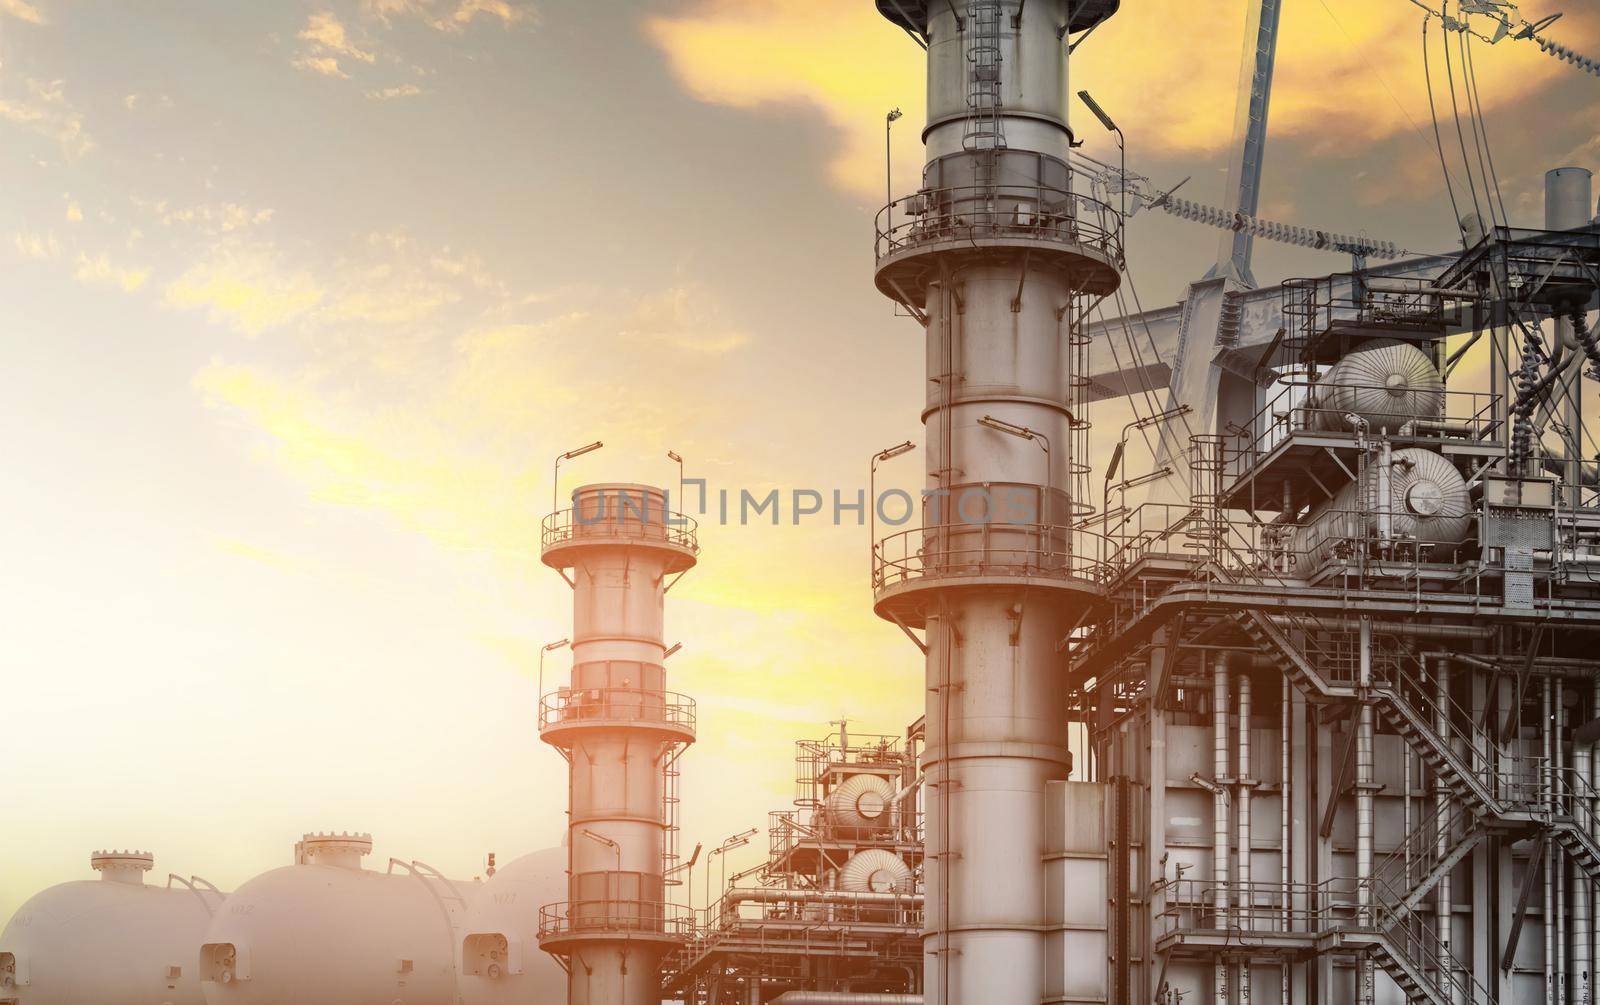 Gas turbine electrical power plant. Global energy crisis concept. Natural gas tank. Industrial gas storage tank. LNG or liquefied natural gas storage tank. Power plants with energy crisis concept. by Fahroni